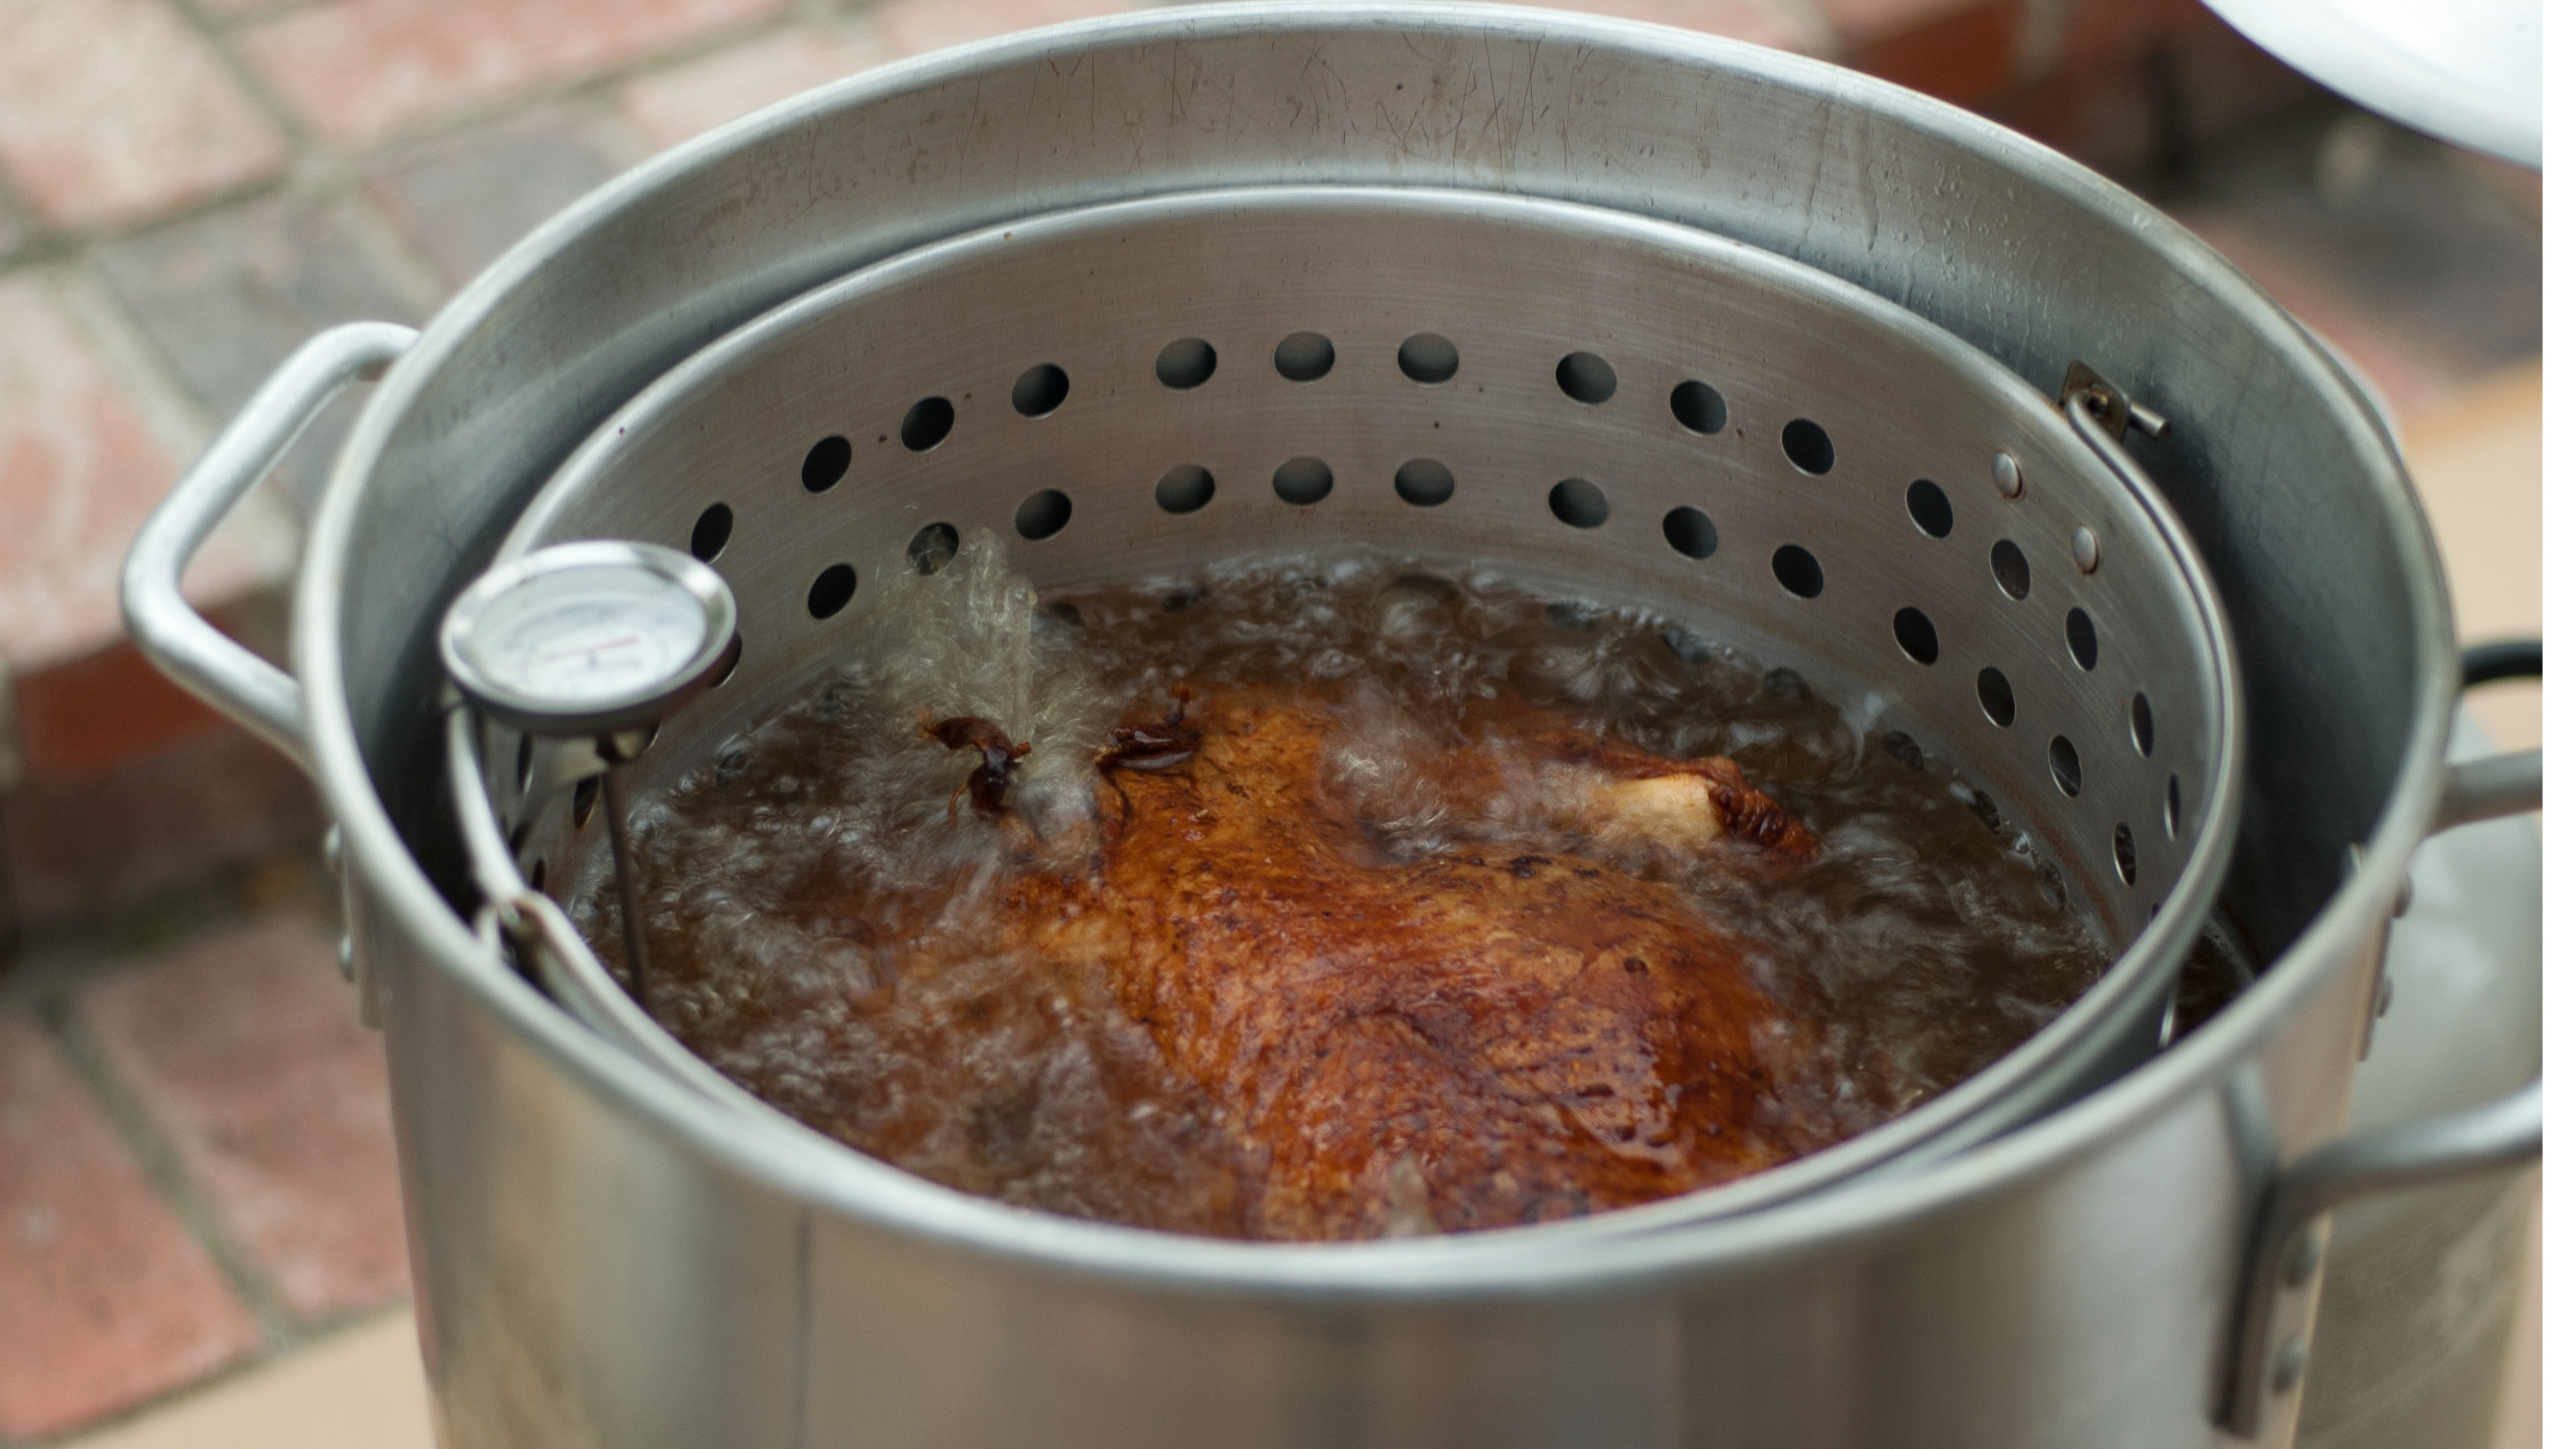 How to Use Your Nexgrill Turkey Fryer (Must-Know Safety Tips!)